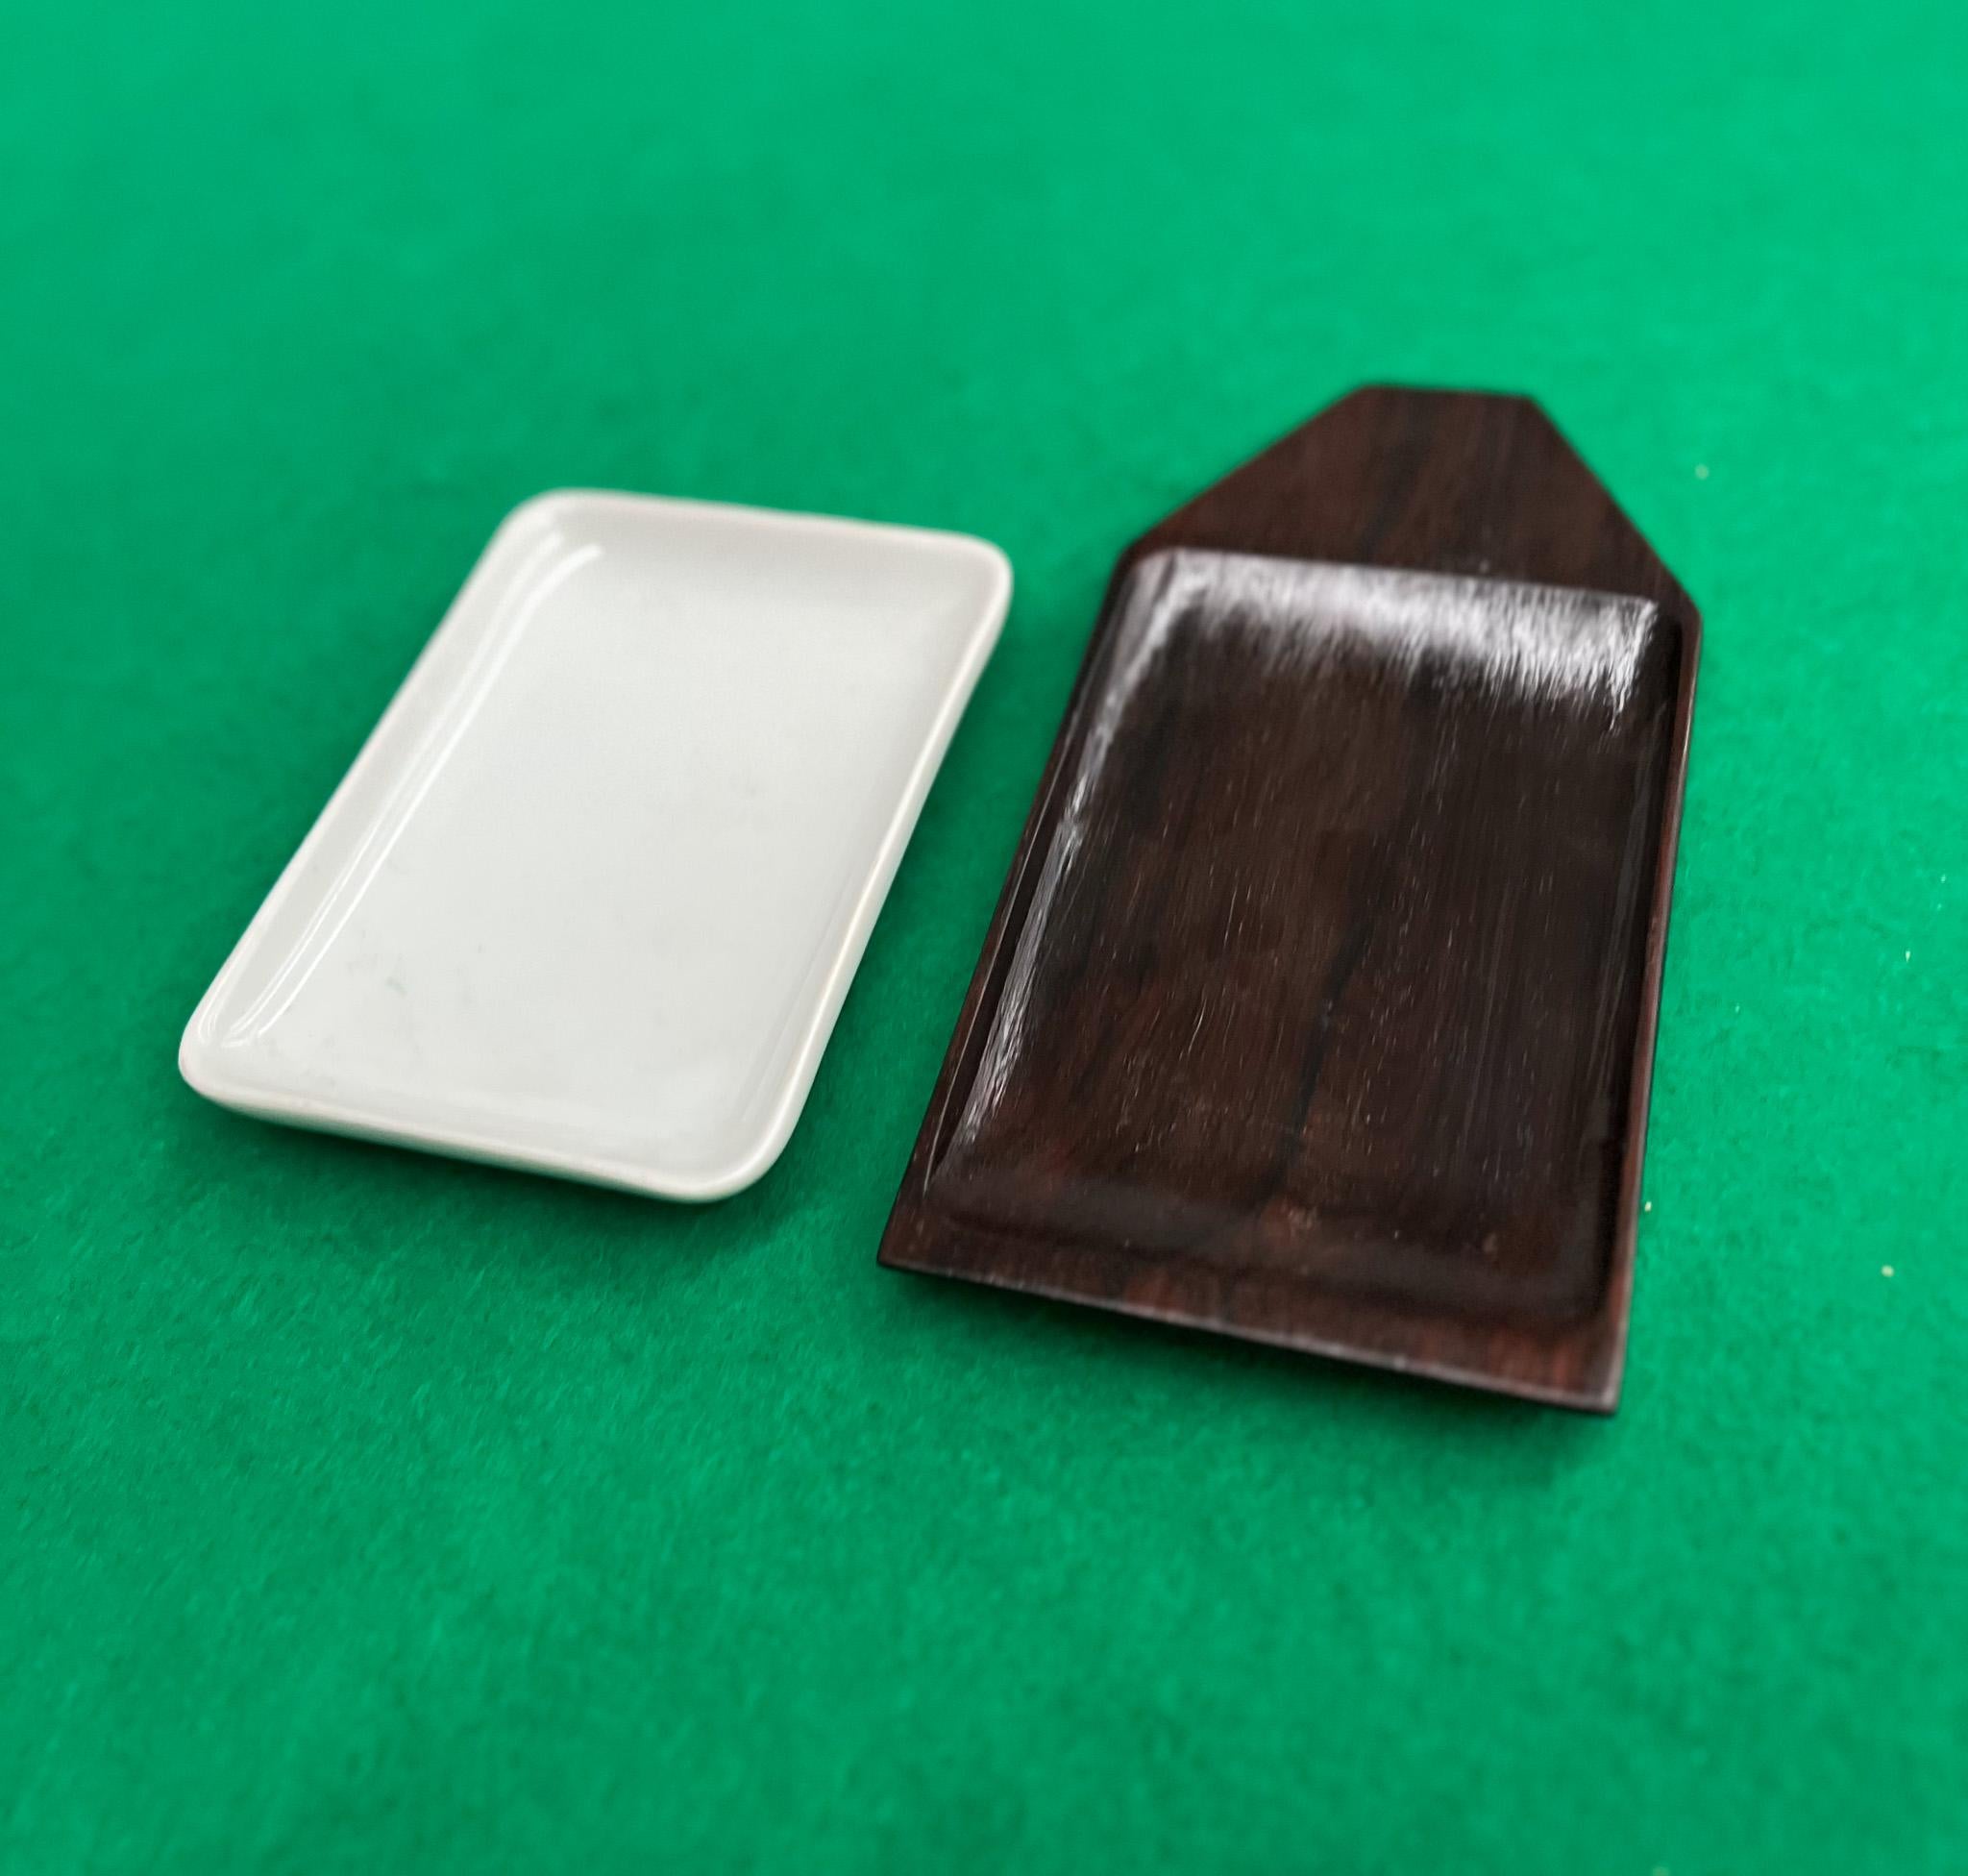 Available today, this miniature serving platter, designed by Casa Finland, can be an amazing addition to any home! This tiny serving platter is made of two parts. The top piece is a white ceramic platter and the bottom is a brown wooden platter that